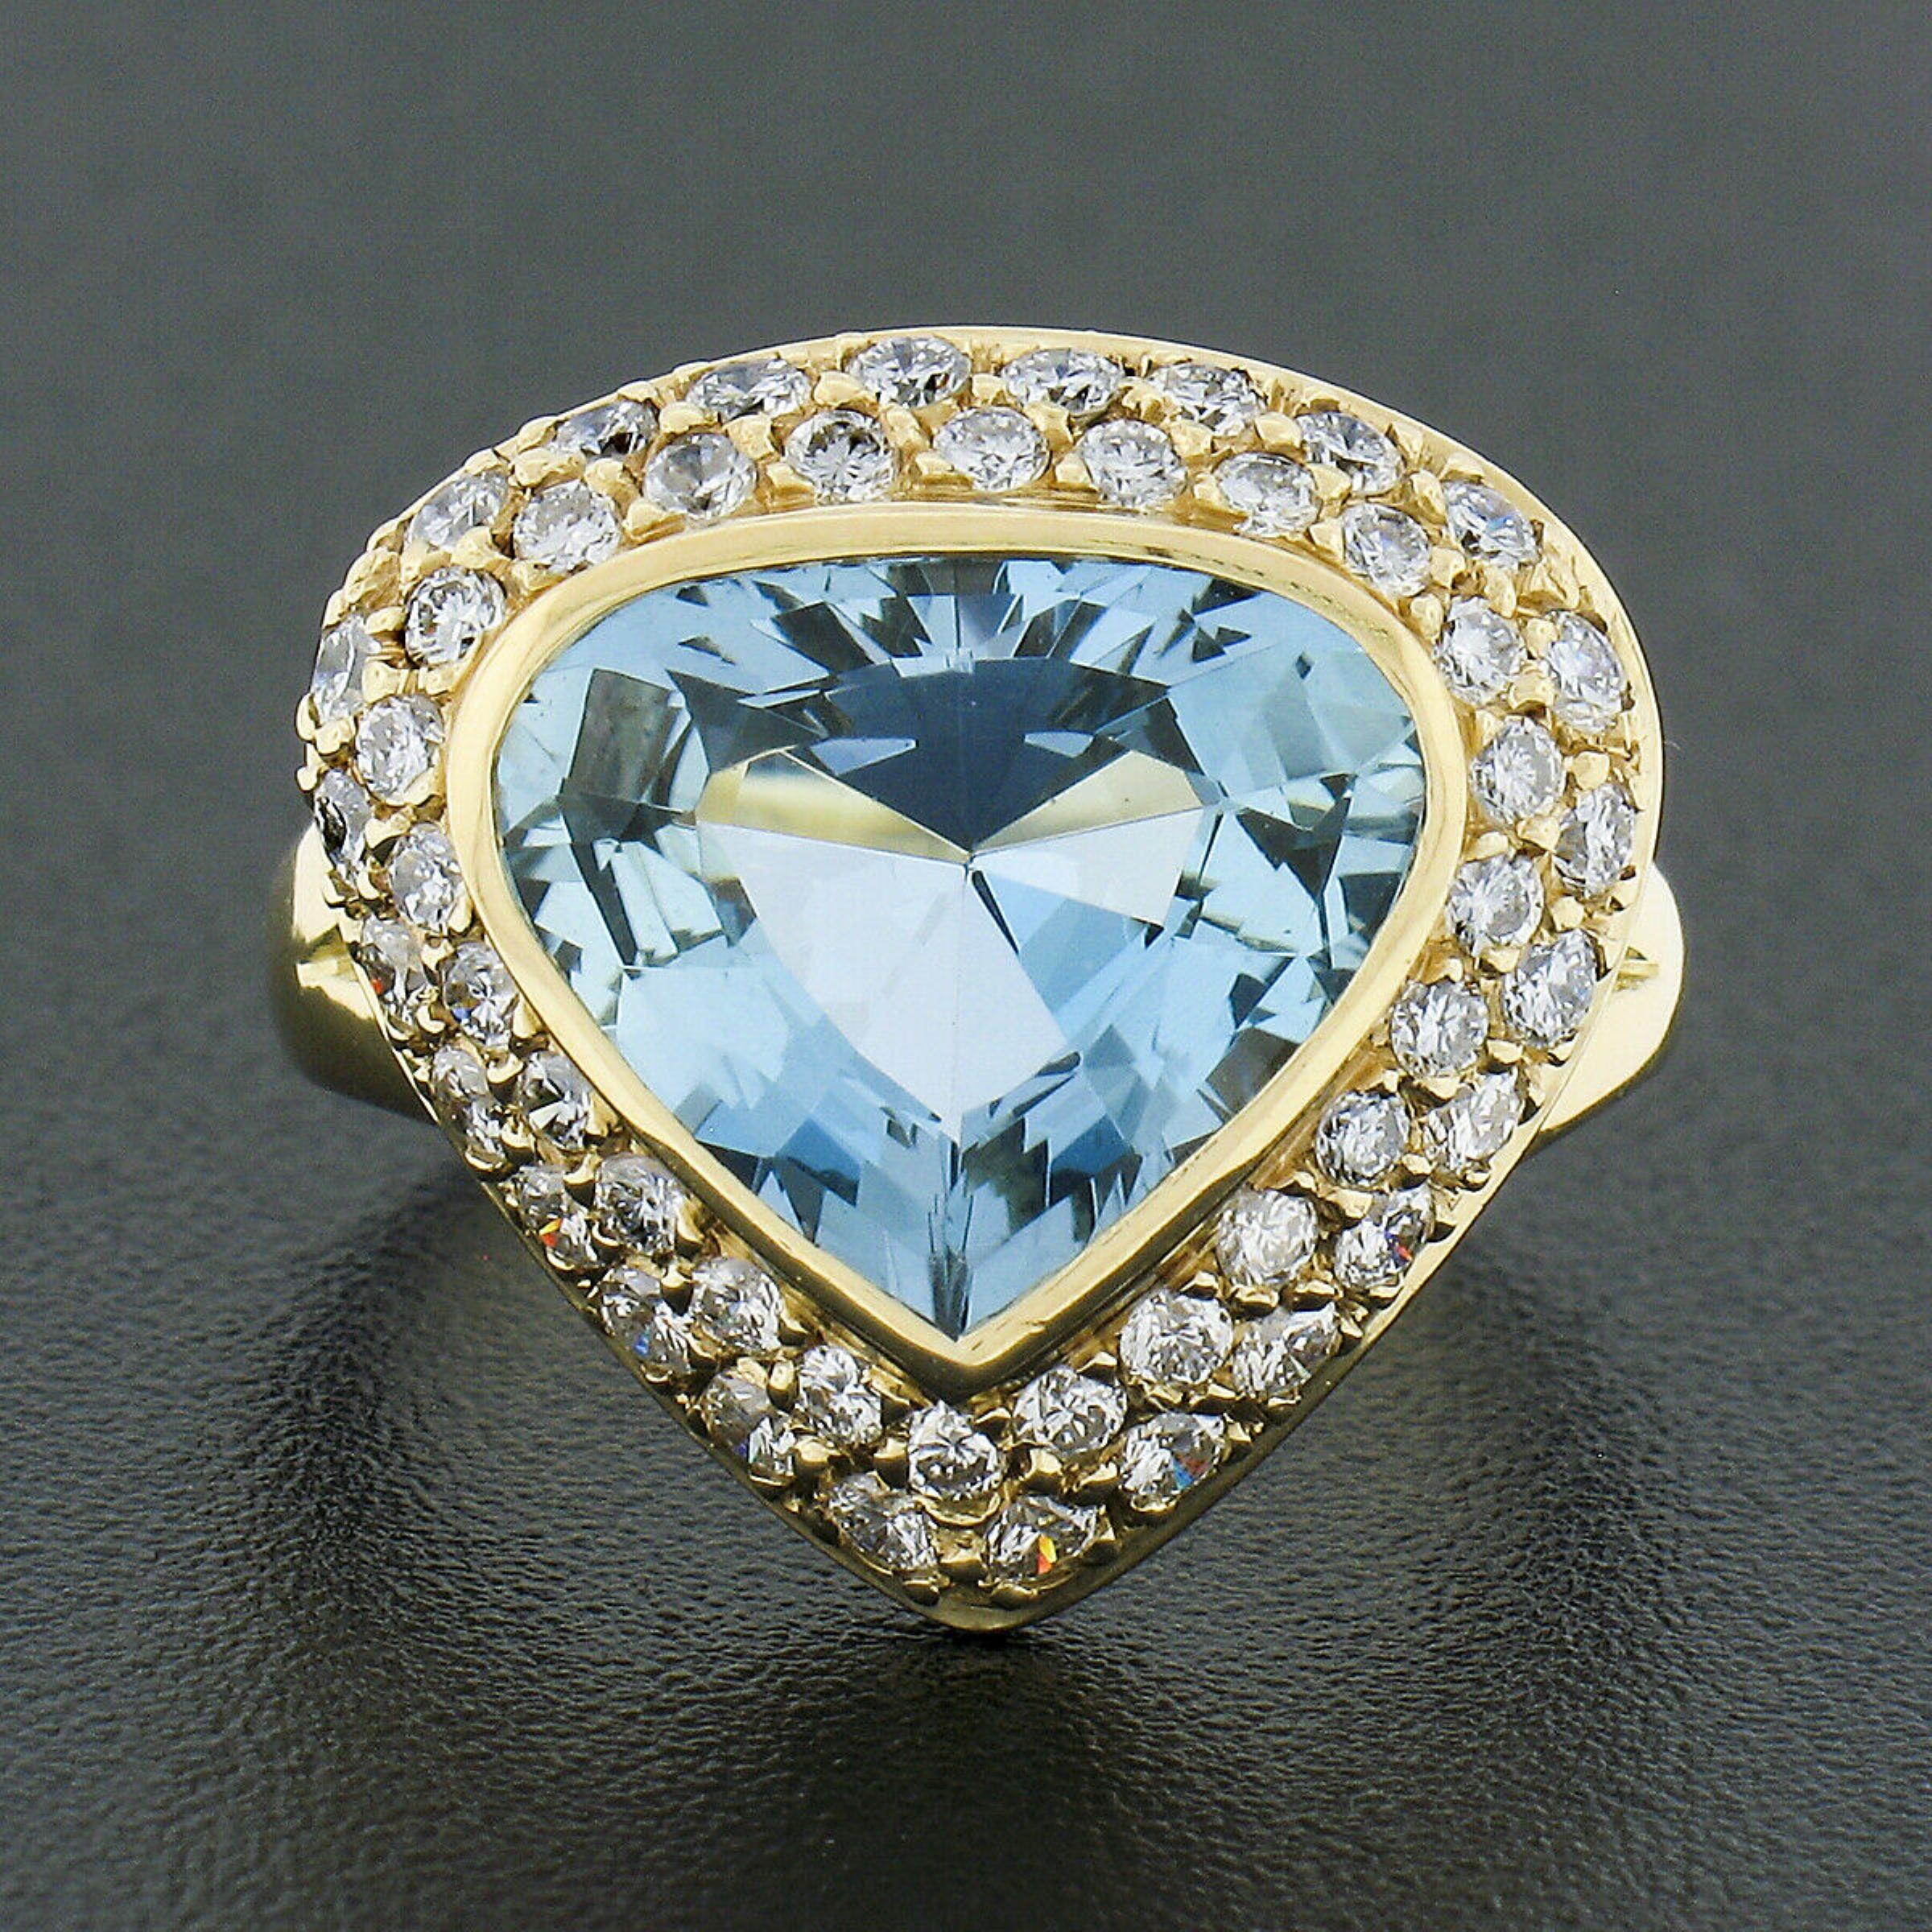 Here we have a magnificent cocktail ring that is crafted from solid 18k yellow gold by H.Stern. It features a stunning aquamarine solitaire with a unique modified Wide Pear shape neatly bezel set at the center, weighing approximately 2.90 carats.